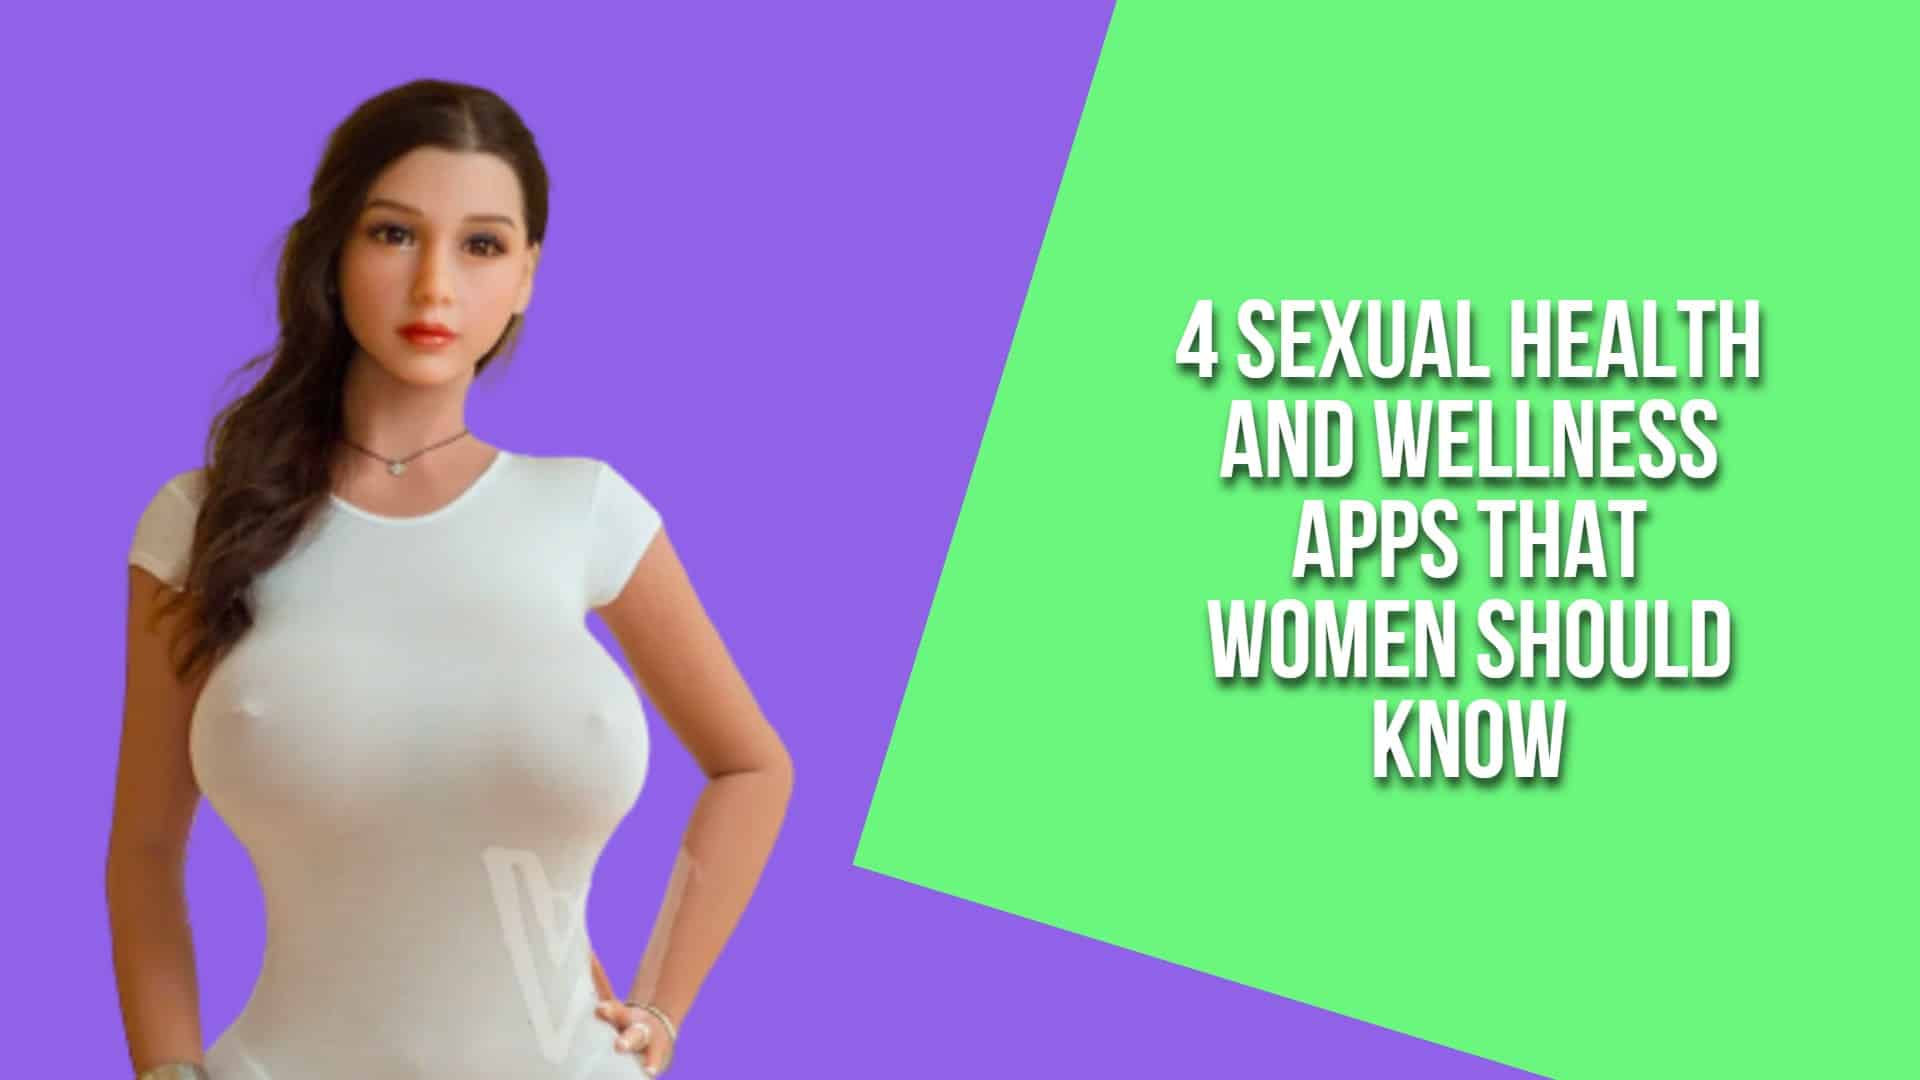 4 Sexual Health and Wellness Apps That Women Should Know